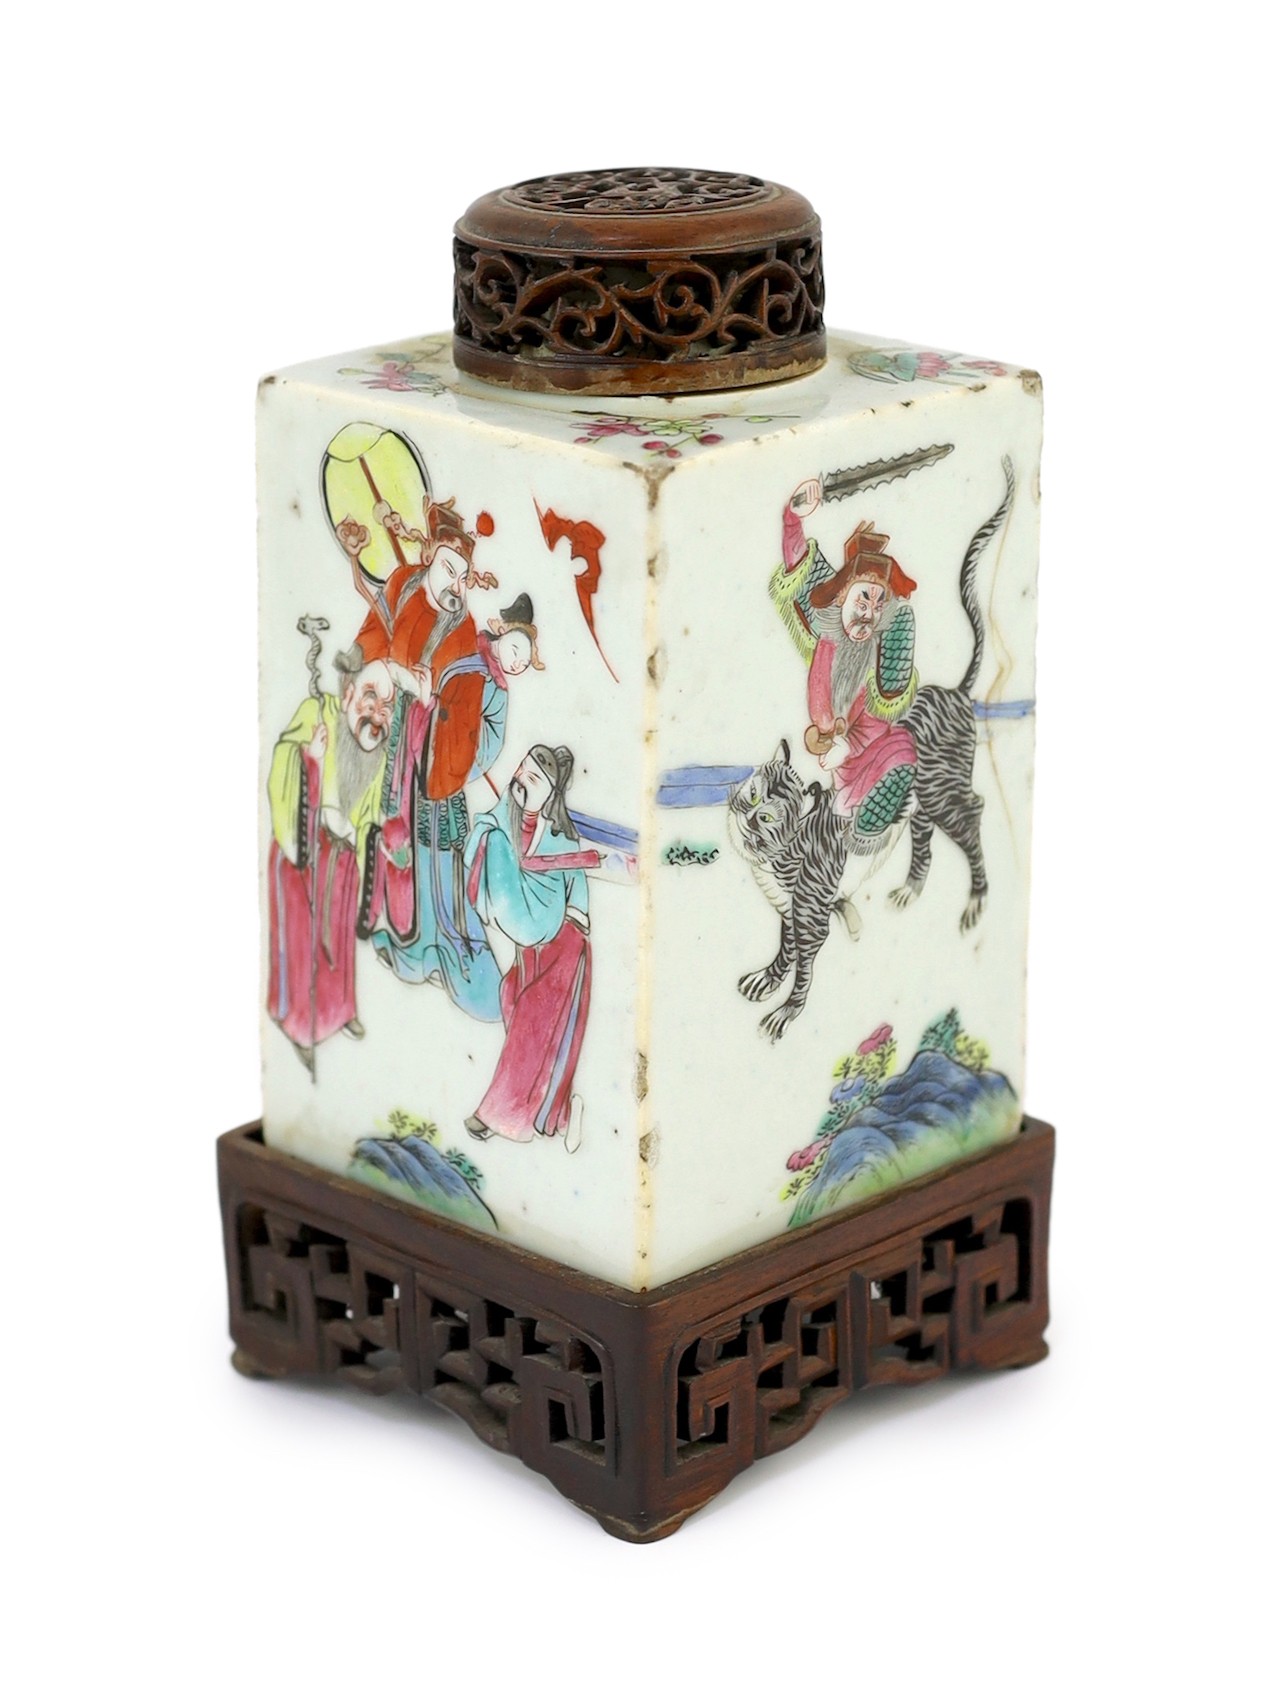 A Chinese famille rose square tea caddy, mid 19th century, painted with the figures of the Shanxing,